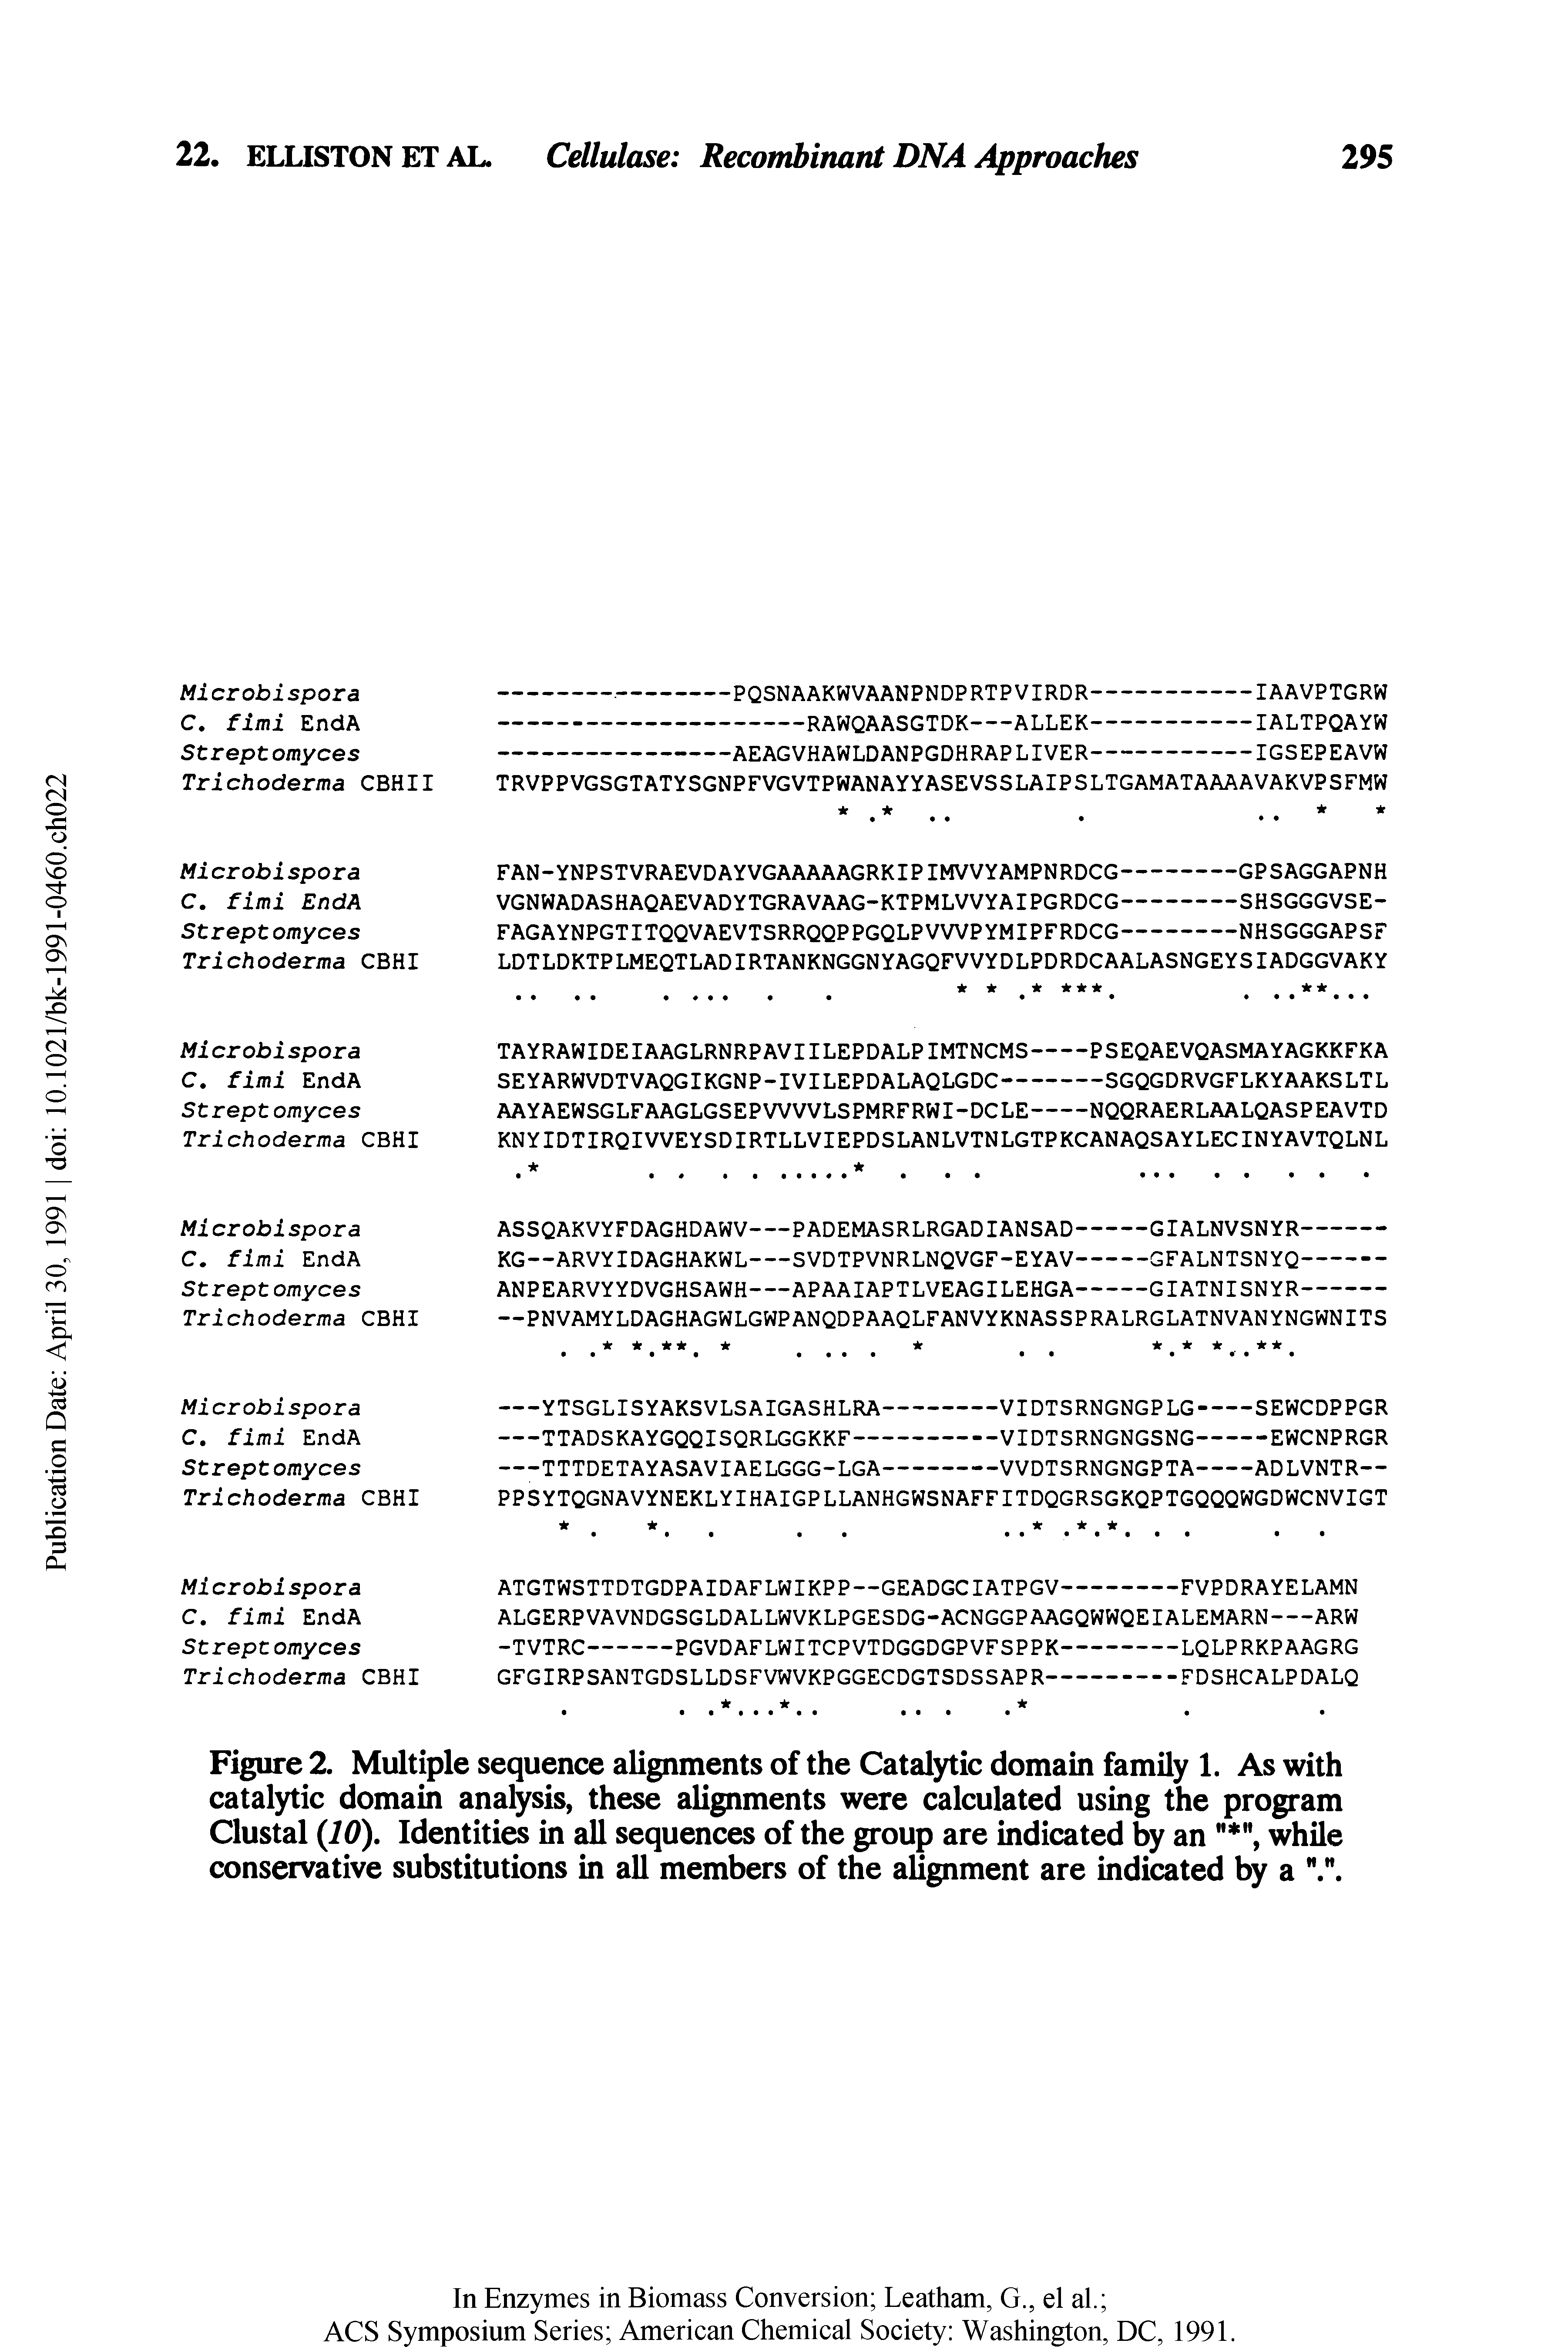 Figure 2. Multiple sequence alignments of the Catalytic domain family 1. As with catalytic domain analysis, these alignments were calculated using the program Clustal (10), Identities in all sequences of the group are indicated by an while conservative substitutions in all members of the alignment are indicated by a...